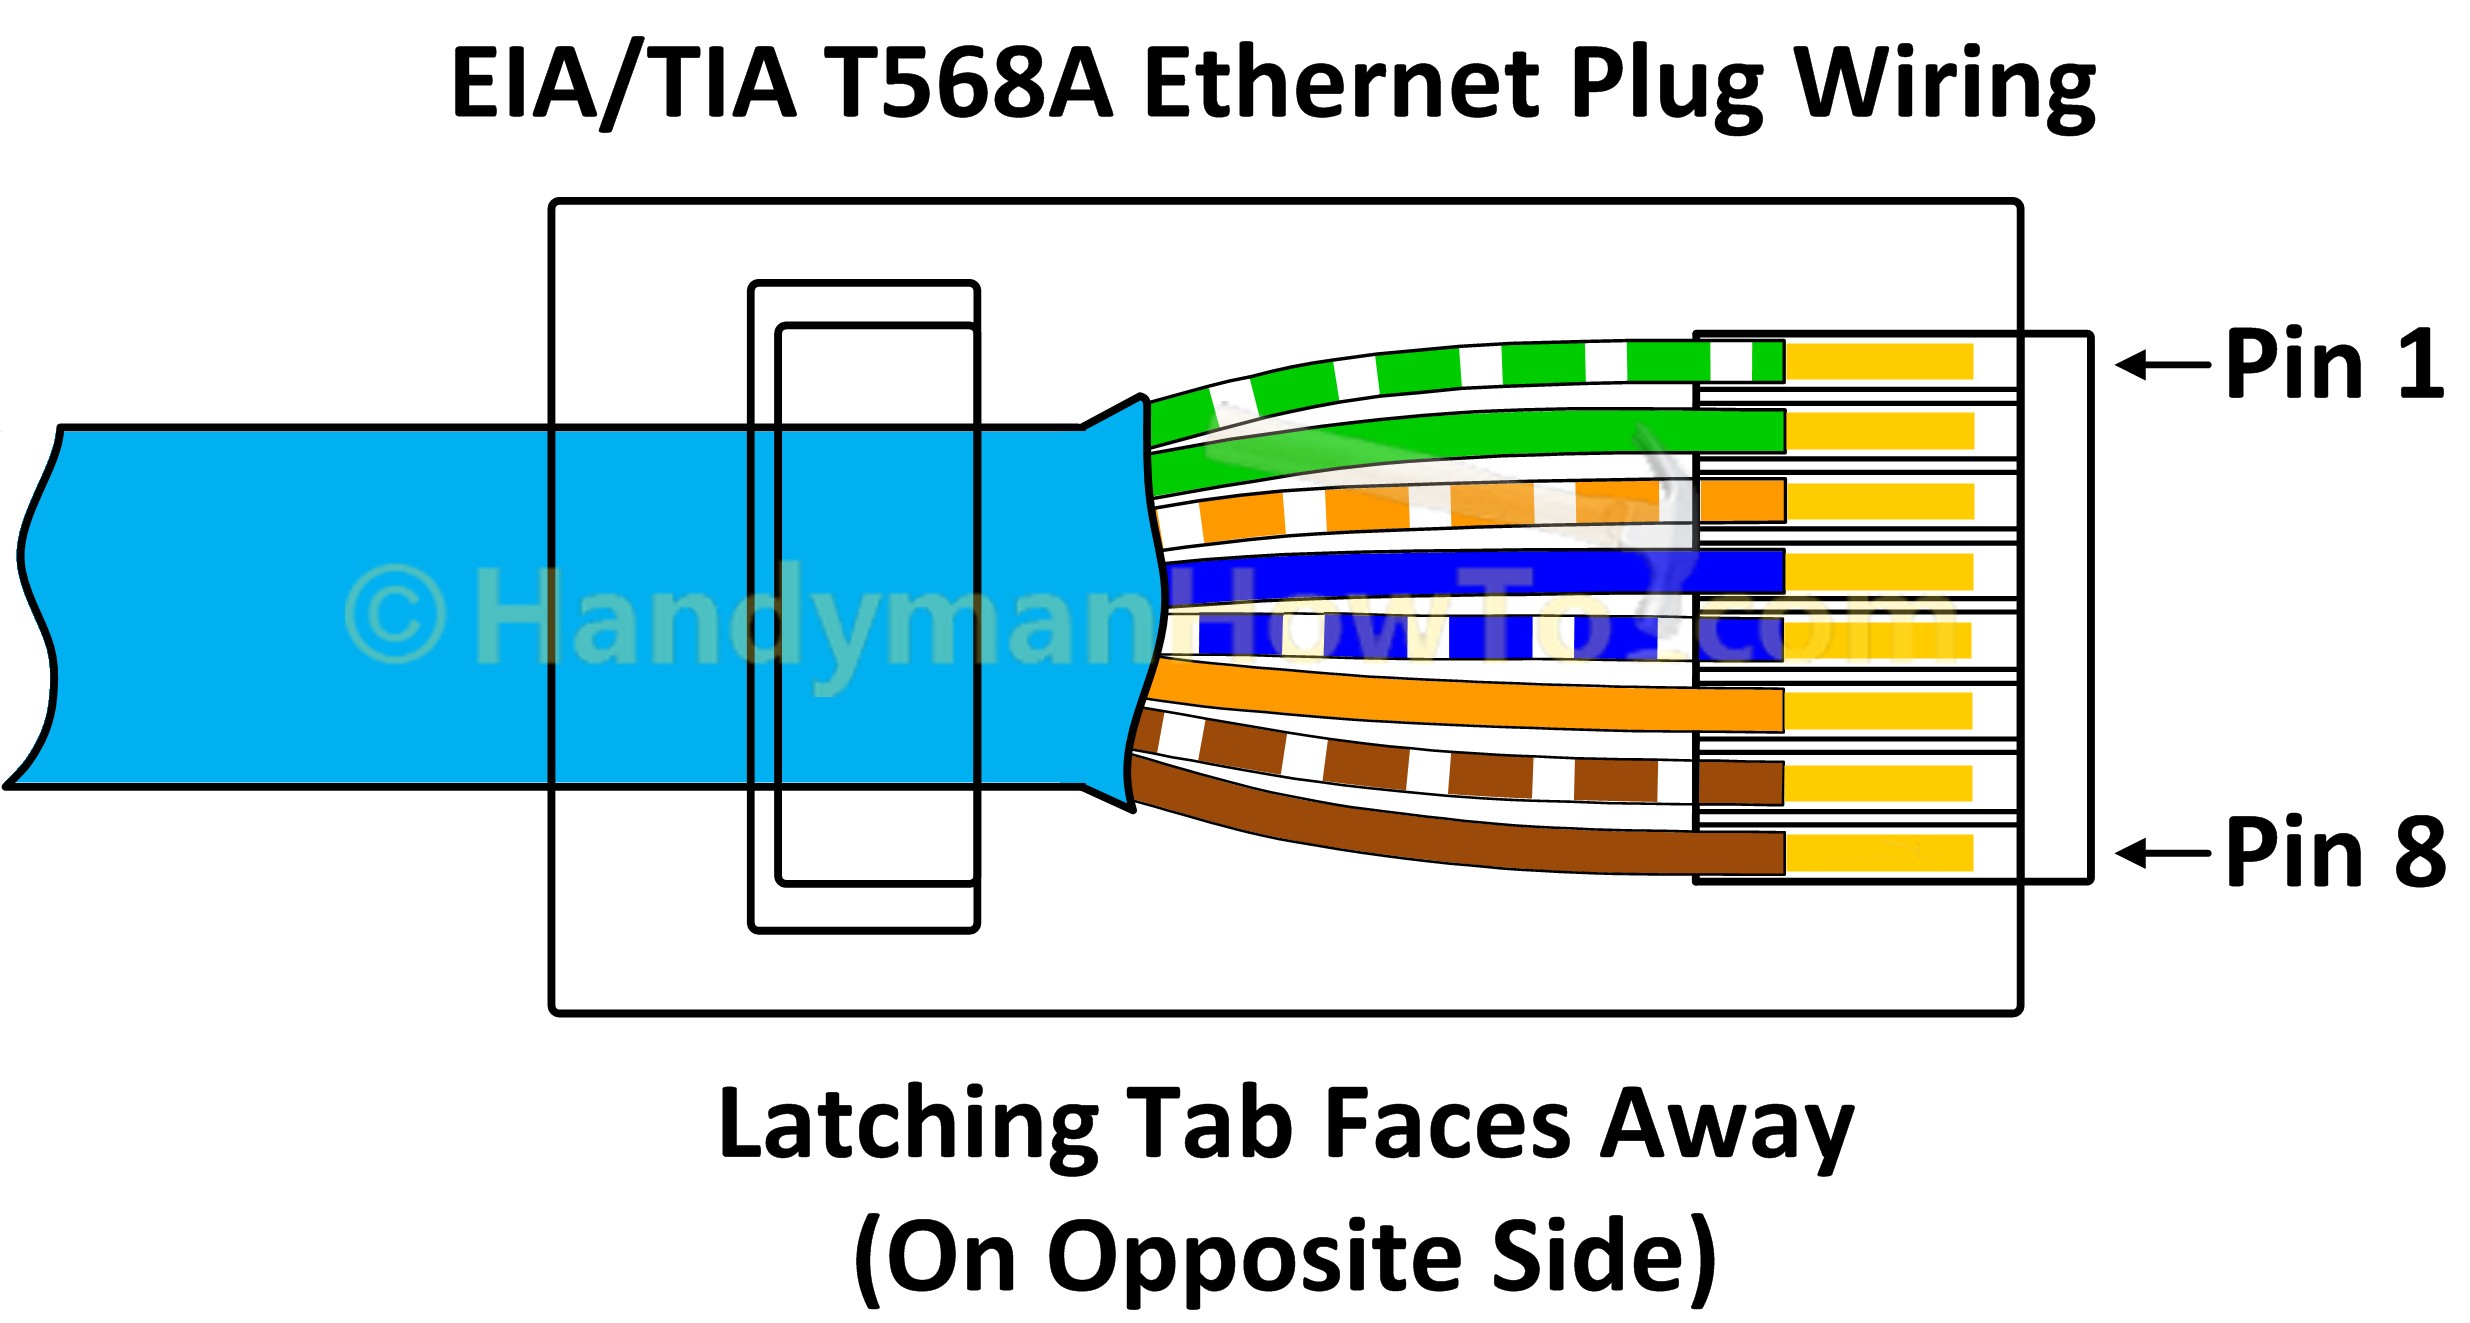 Rj45 Pinout Wiring Diagrams For Cat5e Cat6 Cable Bright Cat5 Cat6 Home Wiring Cat 6 Cable Wiring Diagram